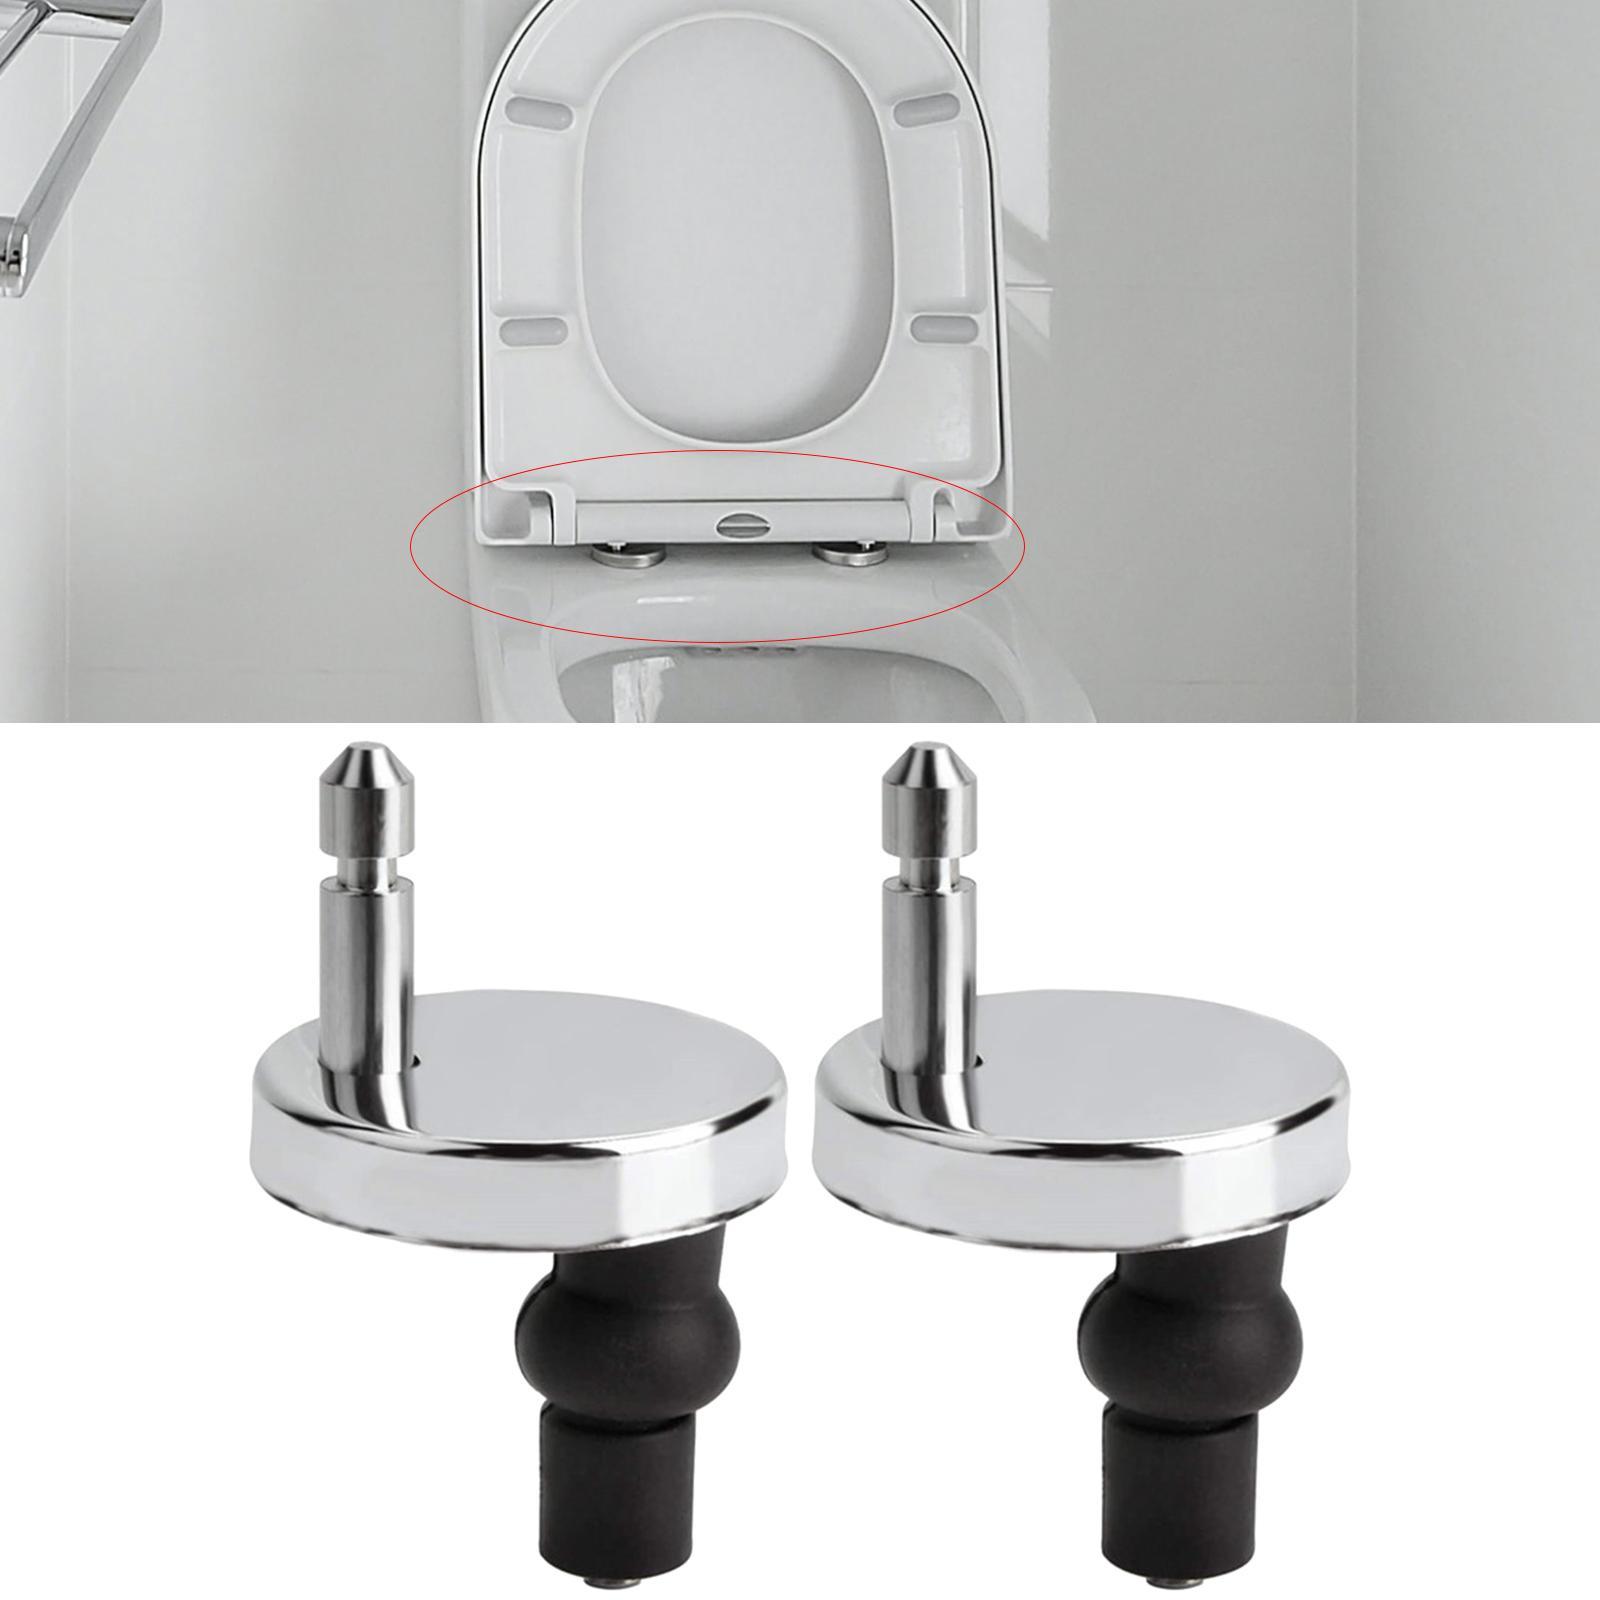 Toilet Seat Hinge Fixings Heavy Duty Hinges Fittings for Replacement Parts